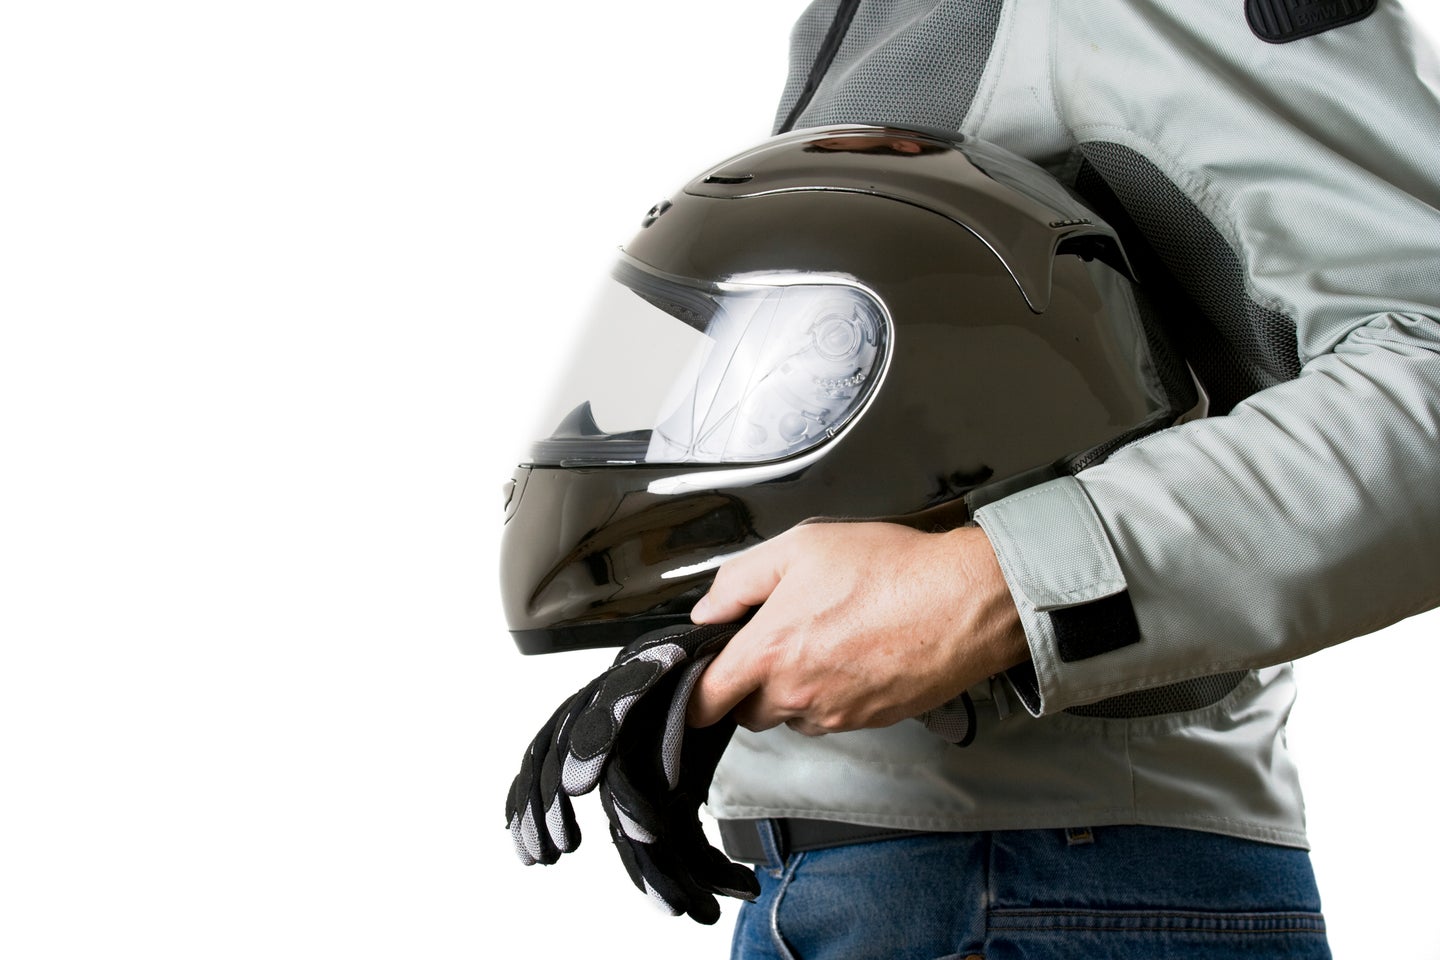 Best Motorcycle Protective Gear: Stay Safe and Secure On the Road